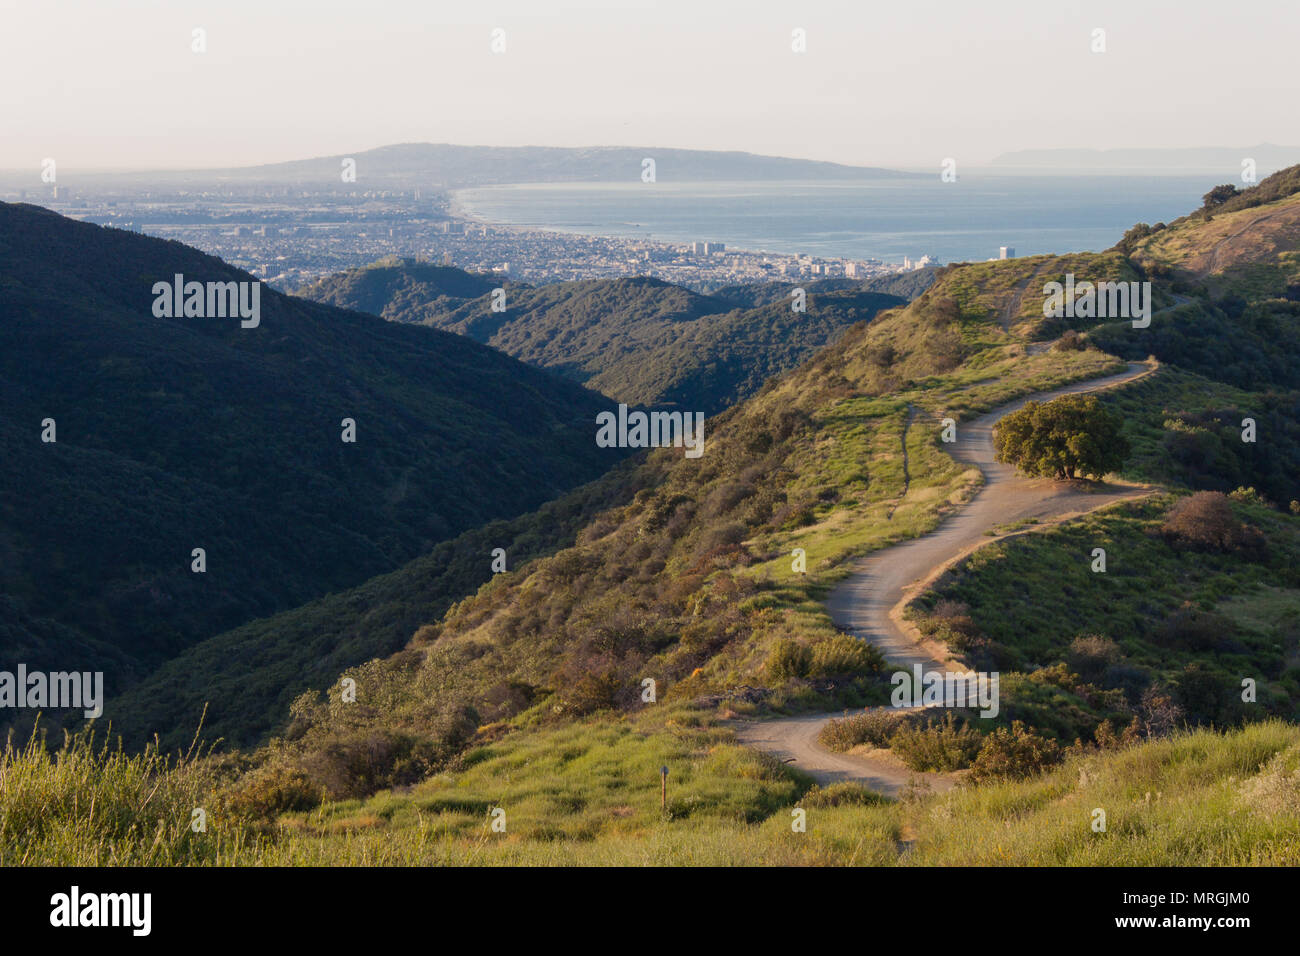 A landscape view of west Los Angeles and the Santa Monica Bay from Sullivan Fire Road in the Santa Monica Mountains National Recreation Area. Stock Photo